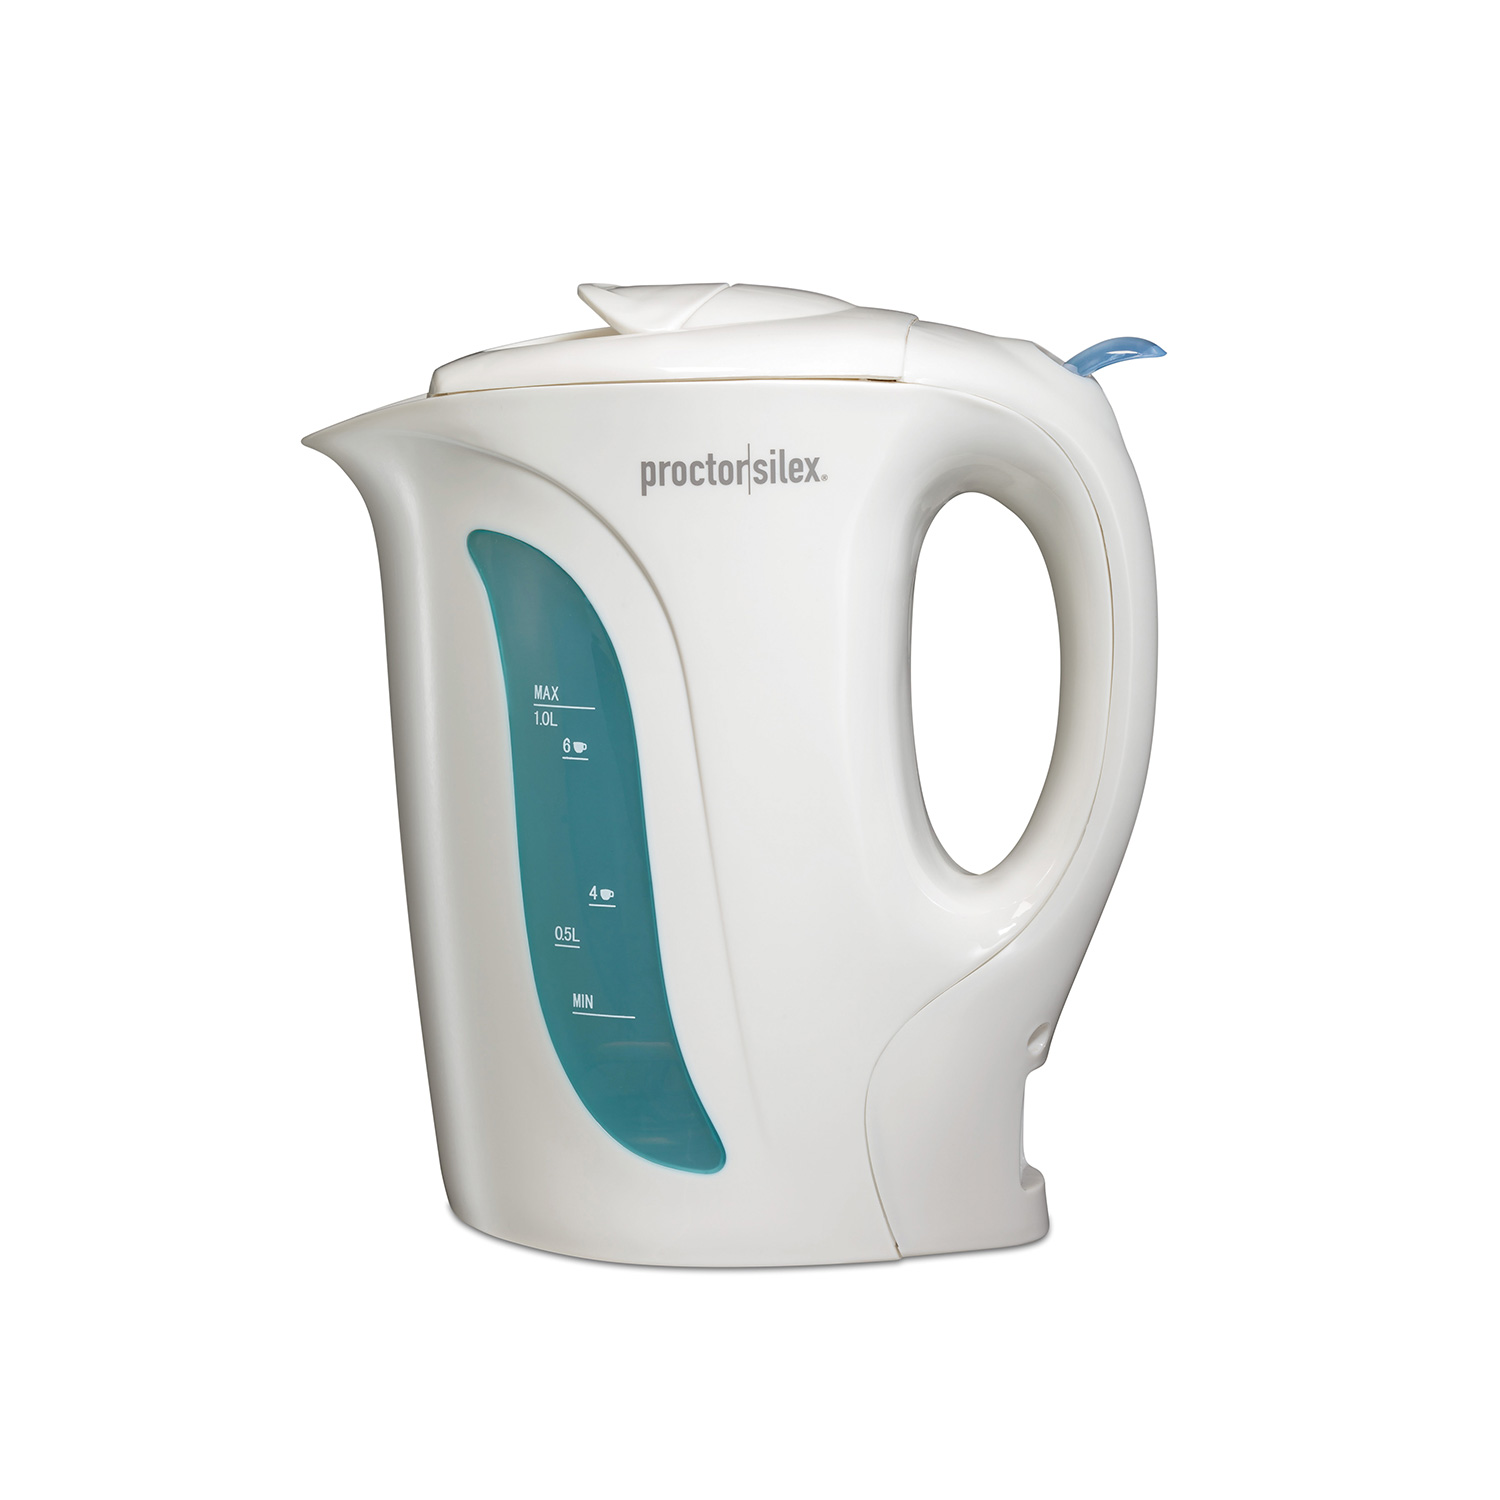 1 Liter Electric Kettle with Boil-Dry Protection - K2070G Small Size